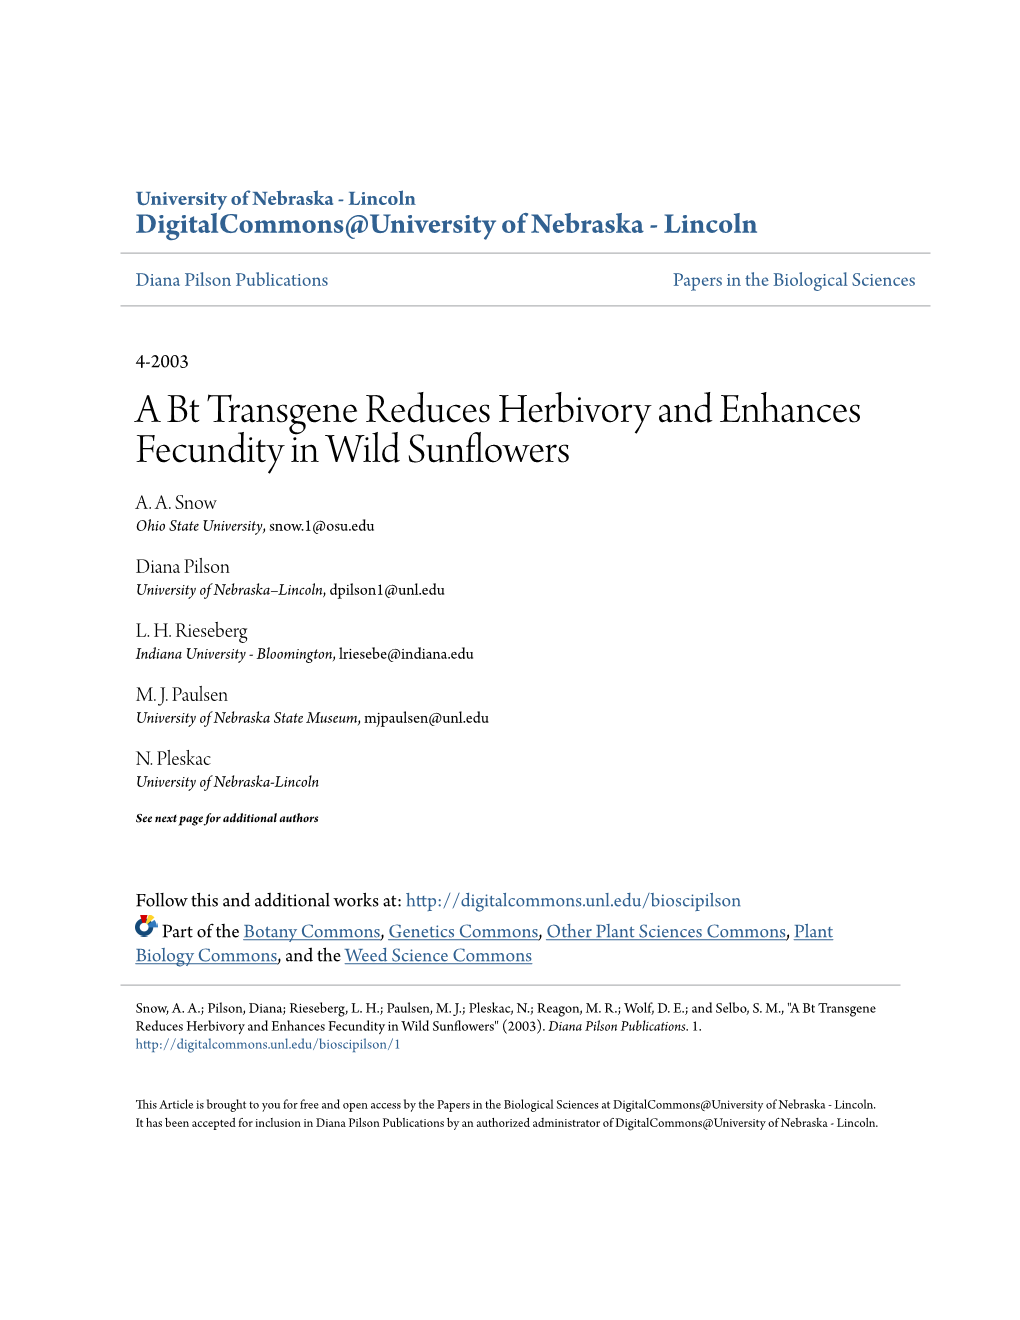 A Bt Transgene Reduces Herbivory and Enhances Fecundity in Wild Sunflowers A